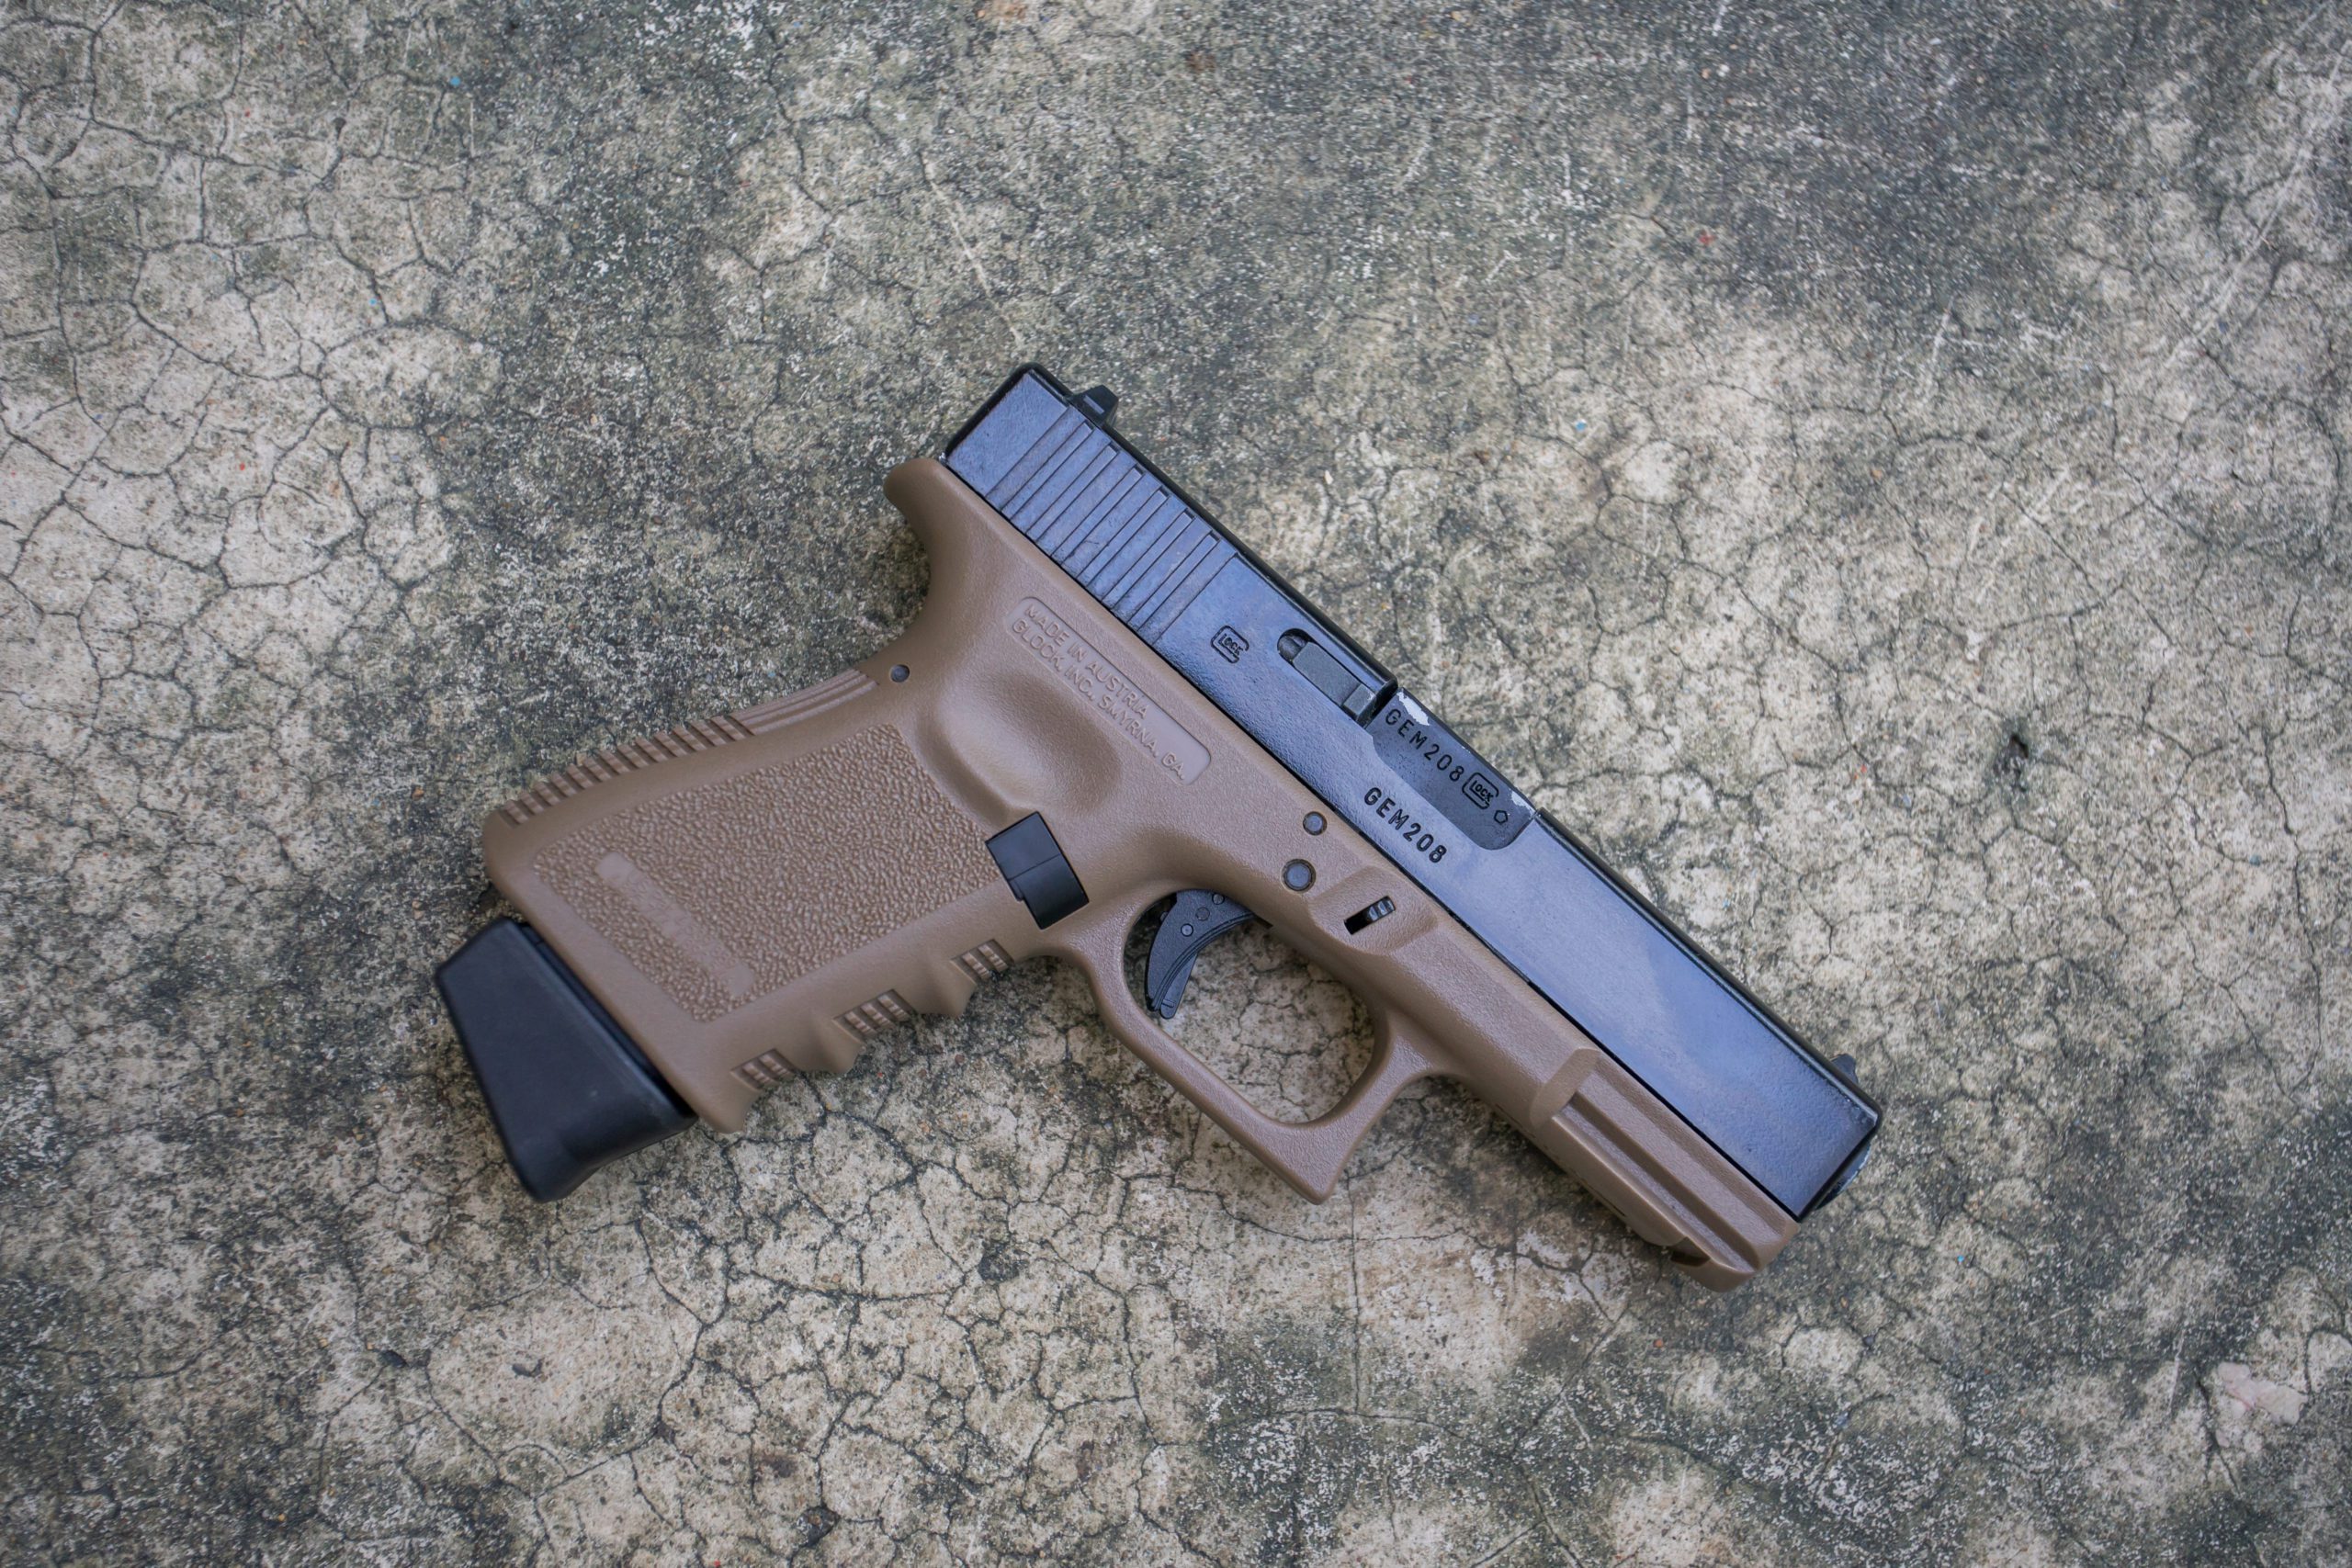 Glock 19 For Home Defense